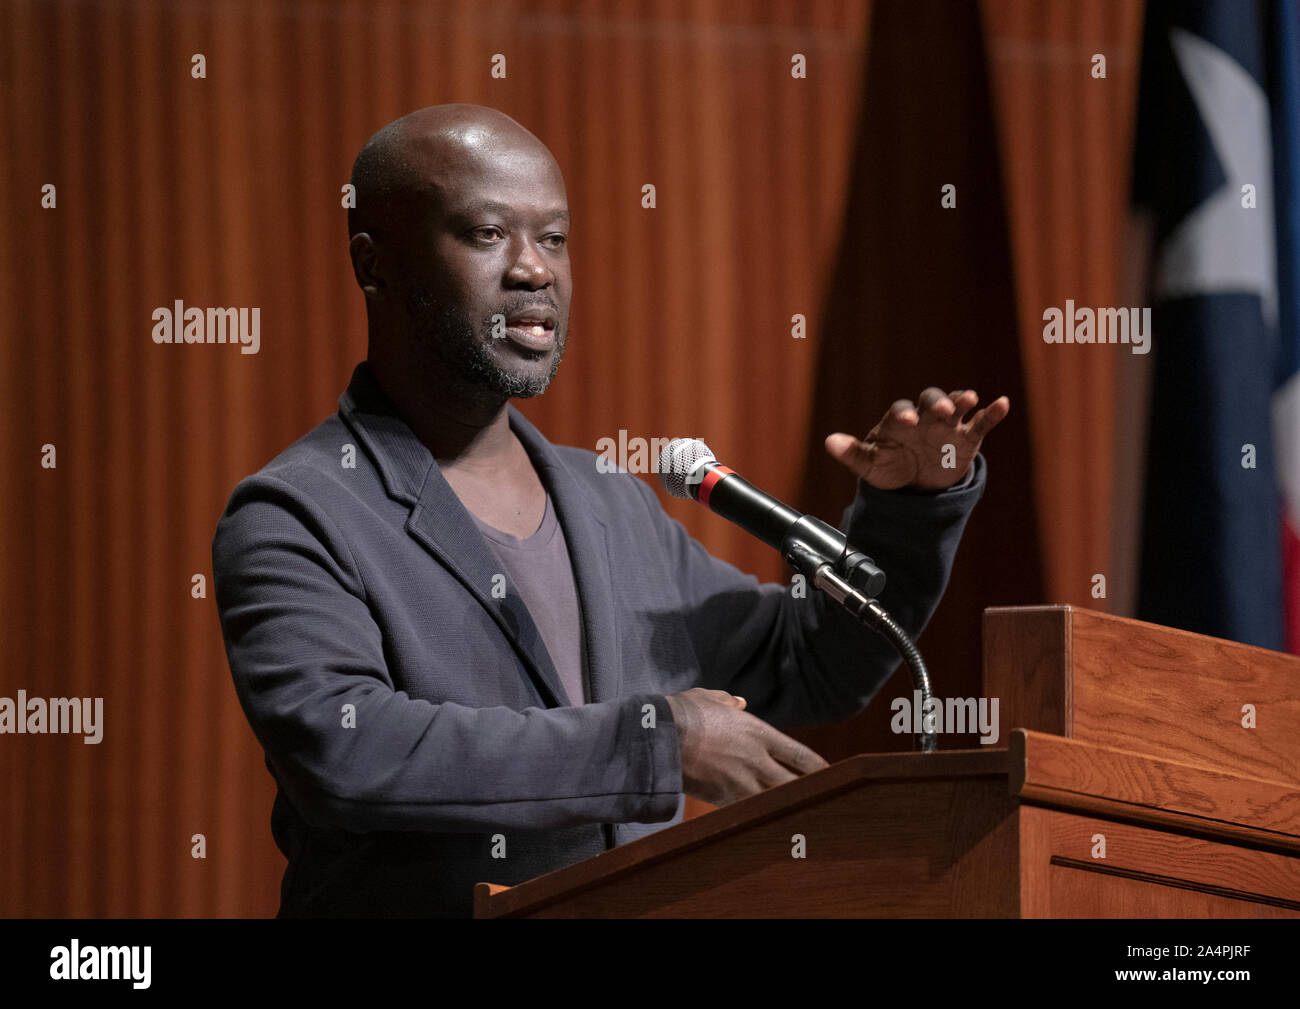 Noted British architect Sir David Adjaye, a native of Ghana, speaks about his international practice during a lecture at the University of Texas at Austin. Adjaye recently was awarded a commission to design the Abrahamic Family House project in Abu Dhabi. Stock Photo